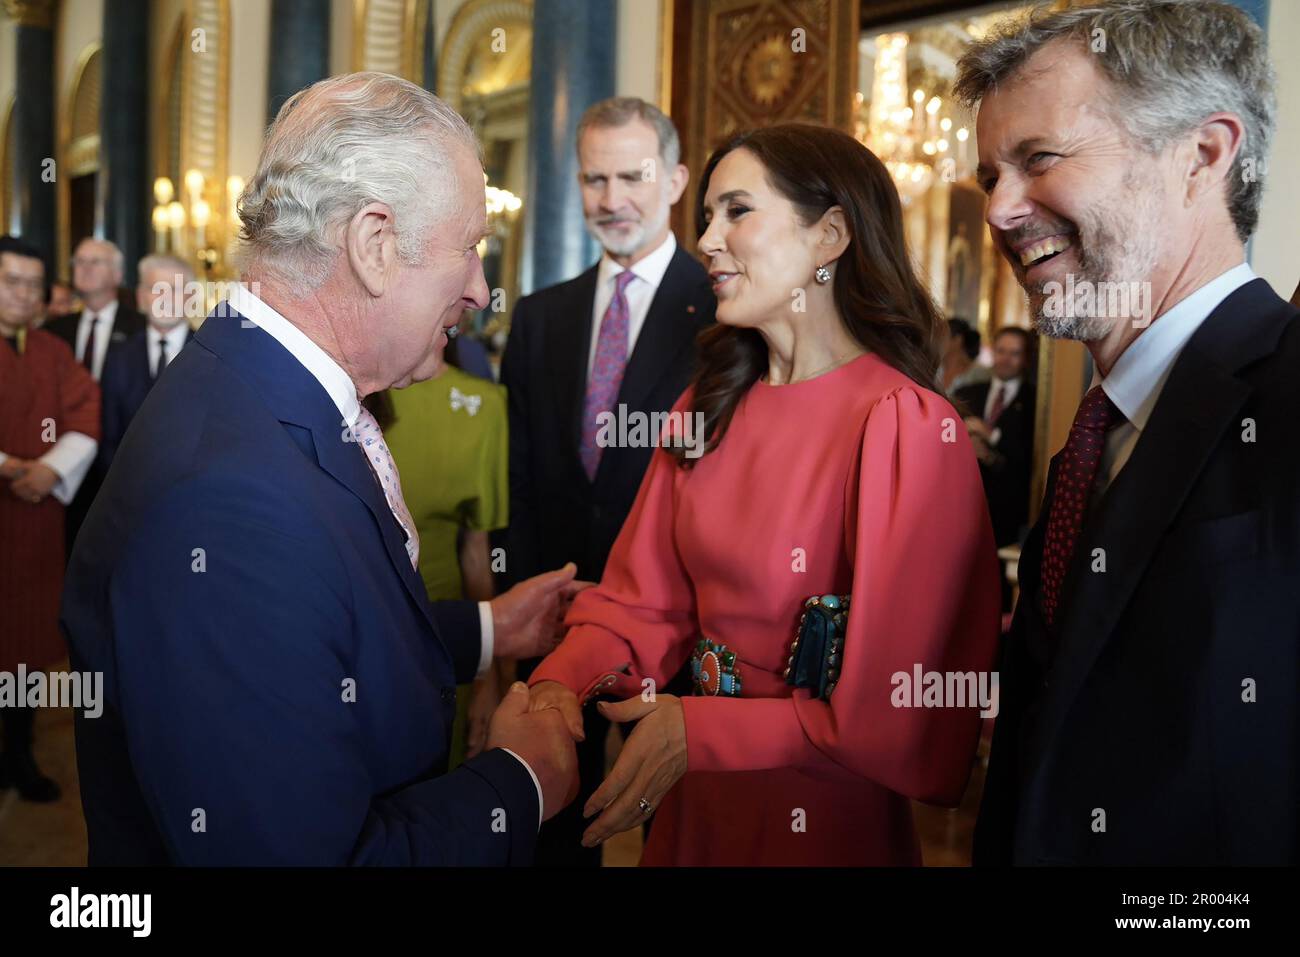 London, UK. 05th May, 2023. King Charles III (L) speaks to Mary, Crown Princess of Denmark, and Frederik, Crown Prince of Denmark, during a reception at Buckingham Palace for overseas guests attending the coronation of King Charles III on Friday, May 5, 2023 in London, England. Photo by The Royal Family/UPI Credit: UPI/Alamy Live News Stock Photo